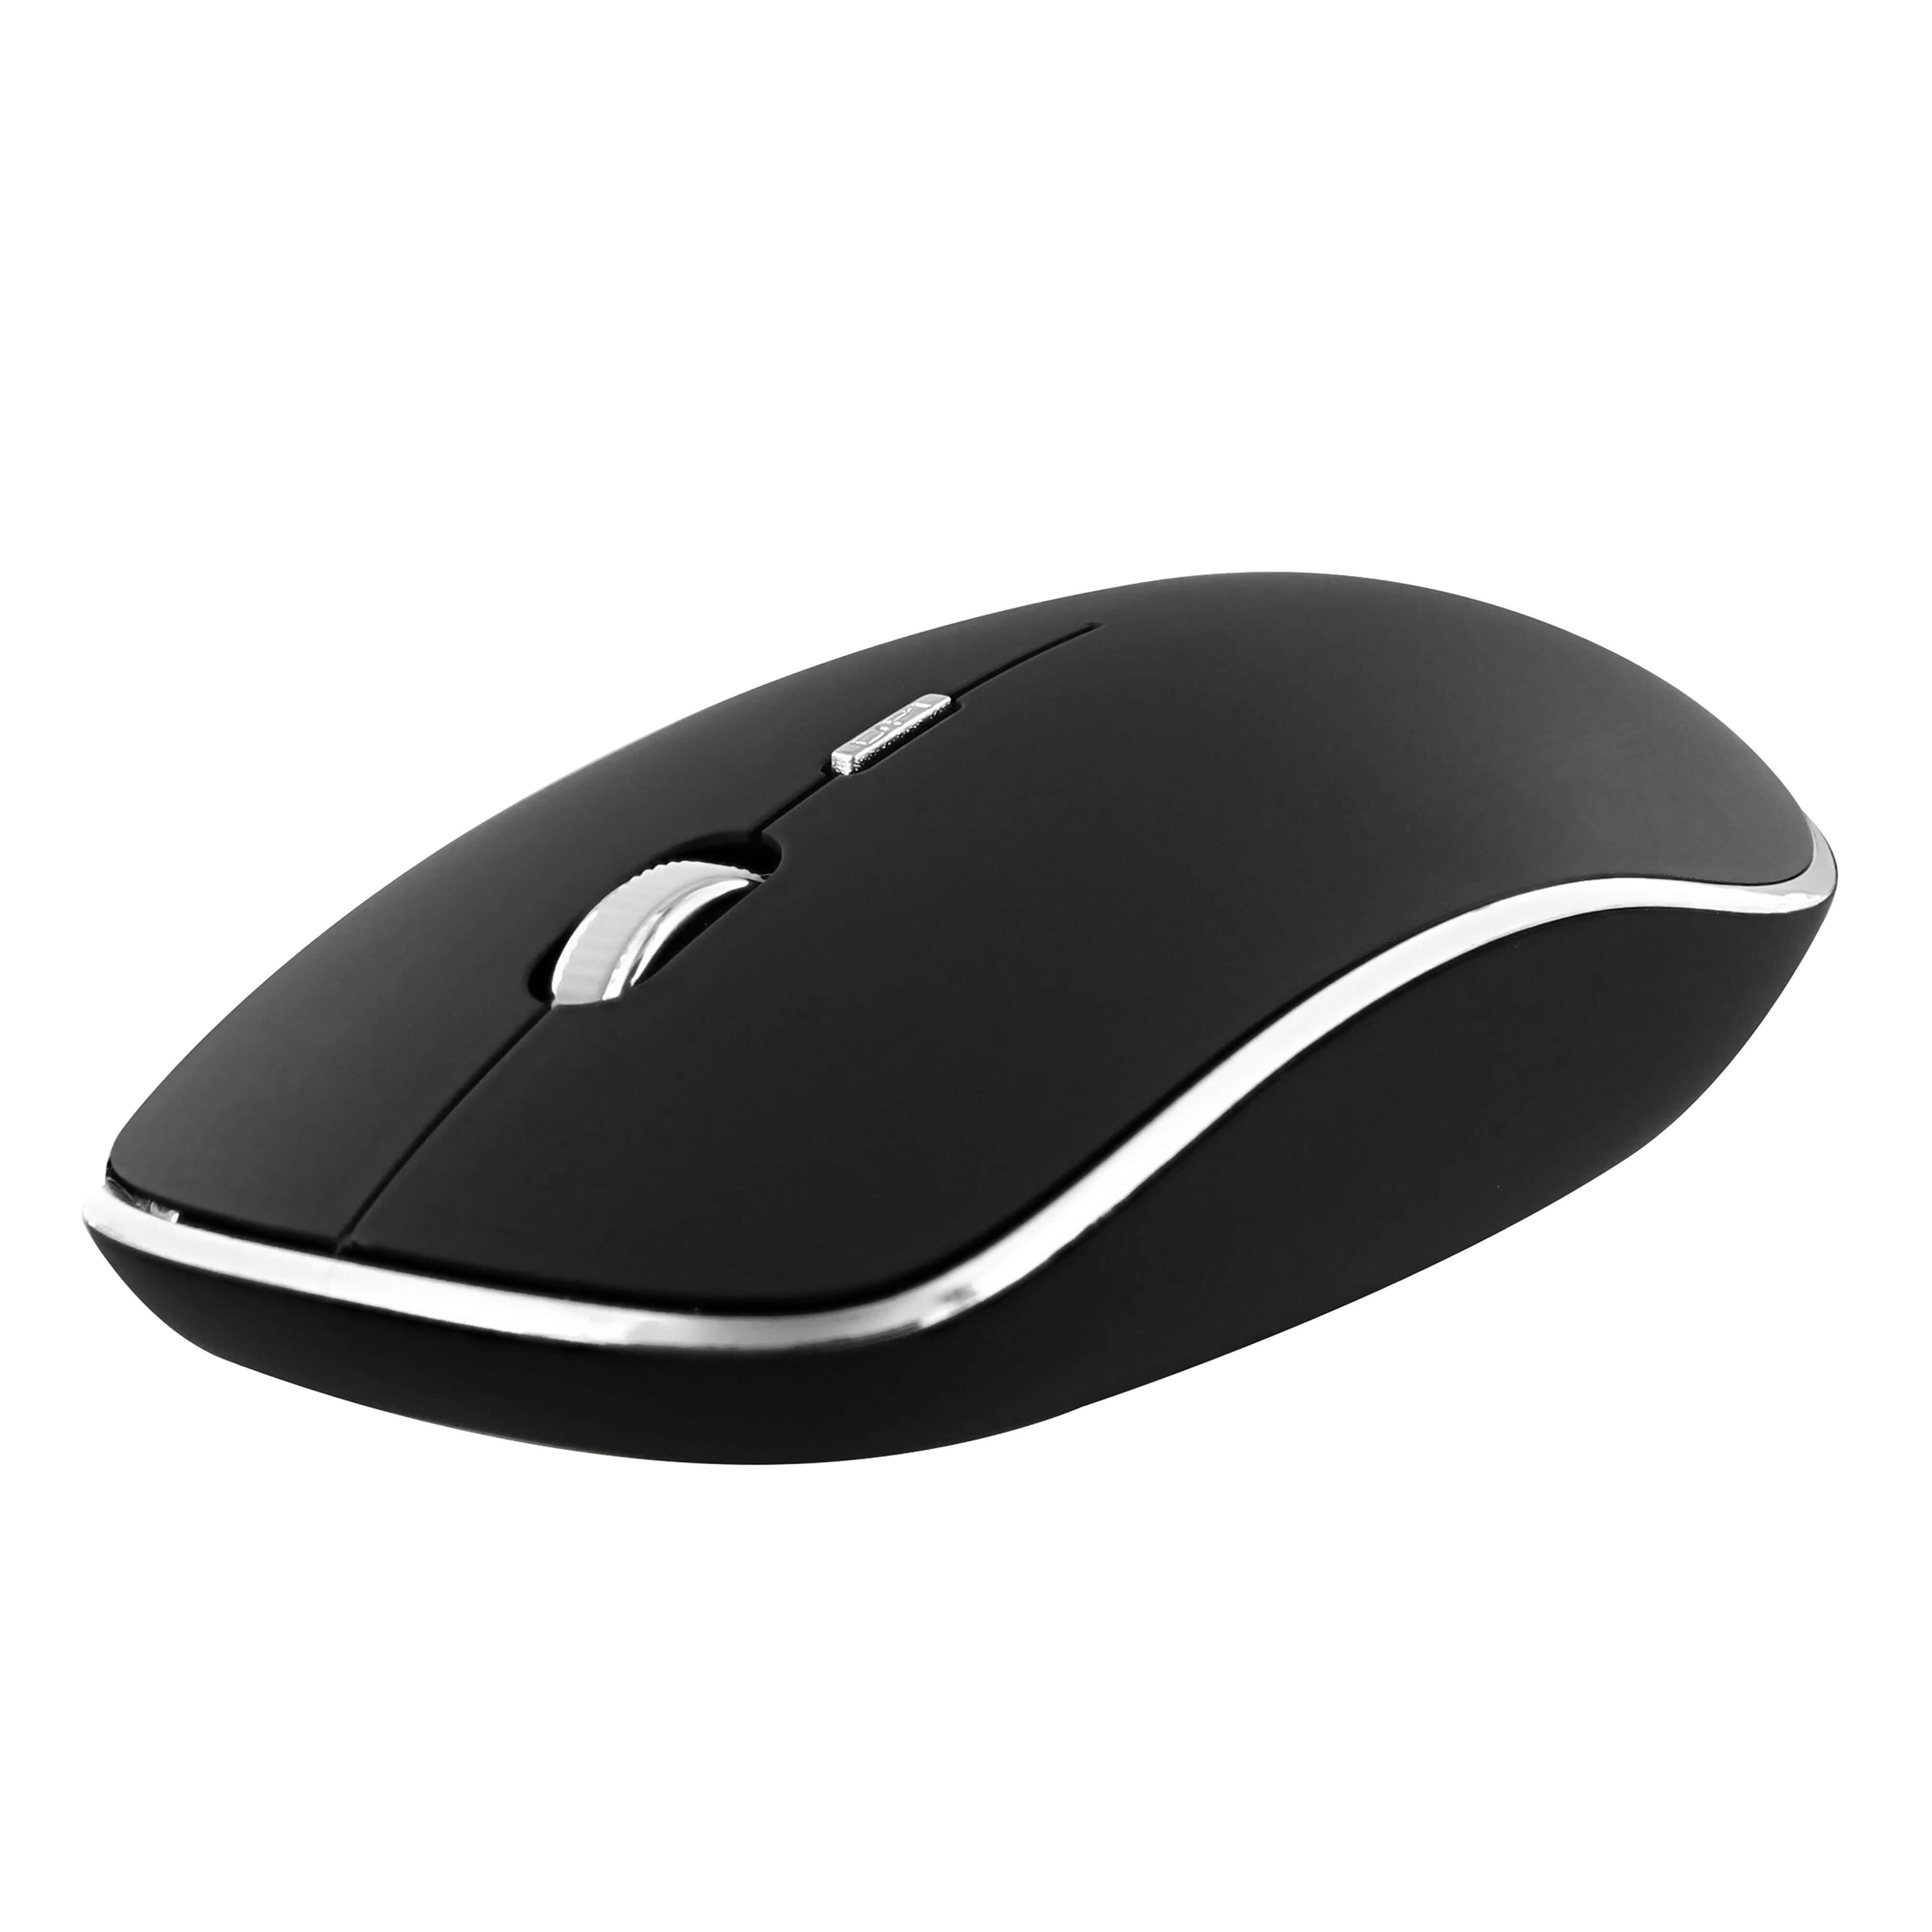 TNB RUBBY WIRELESS OPTICAL MOUSE BLACK